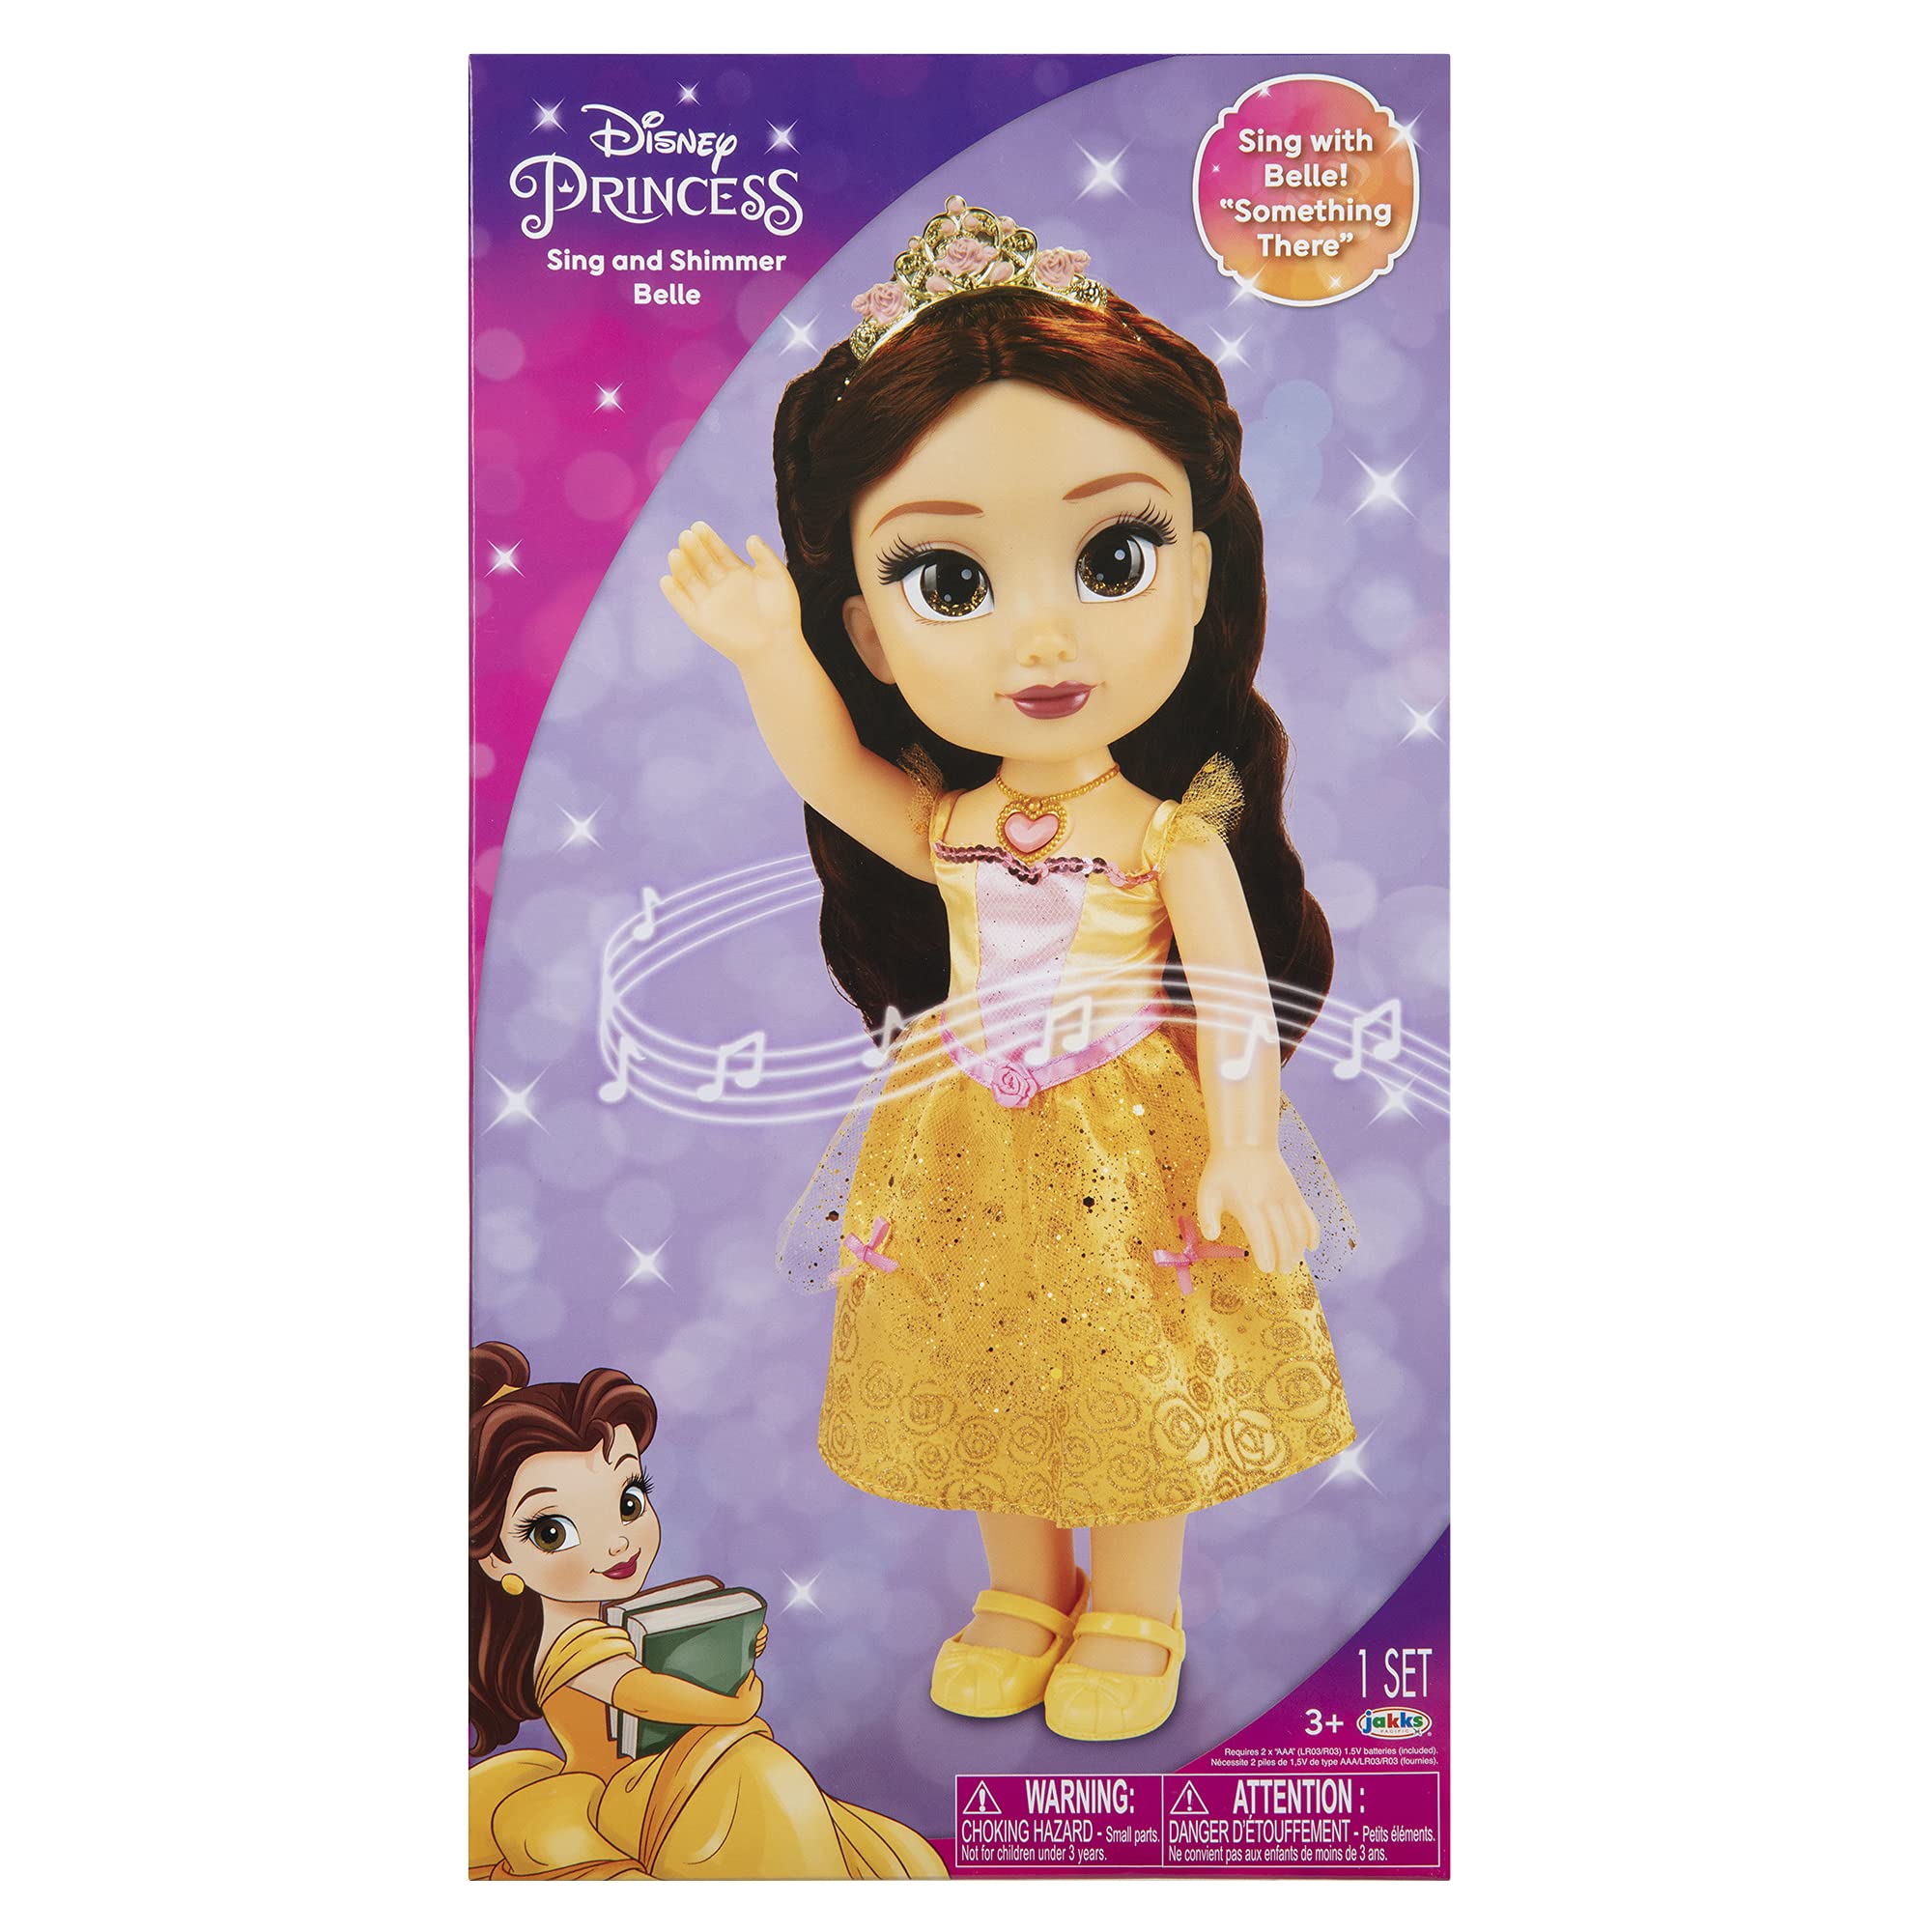 Disney Princess Belle Doll Sing & Shimmer Toddler Doll, Sings Something There [Amazon Exclusive]